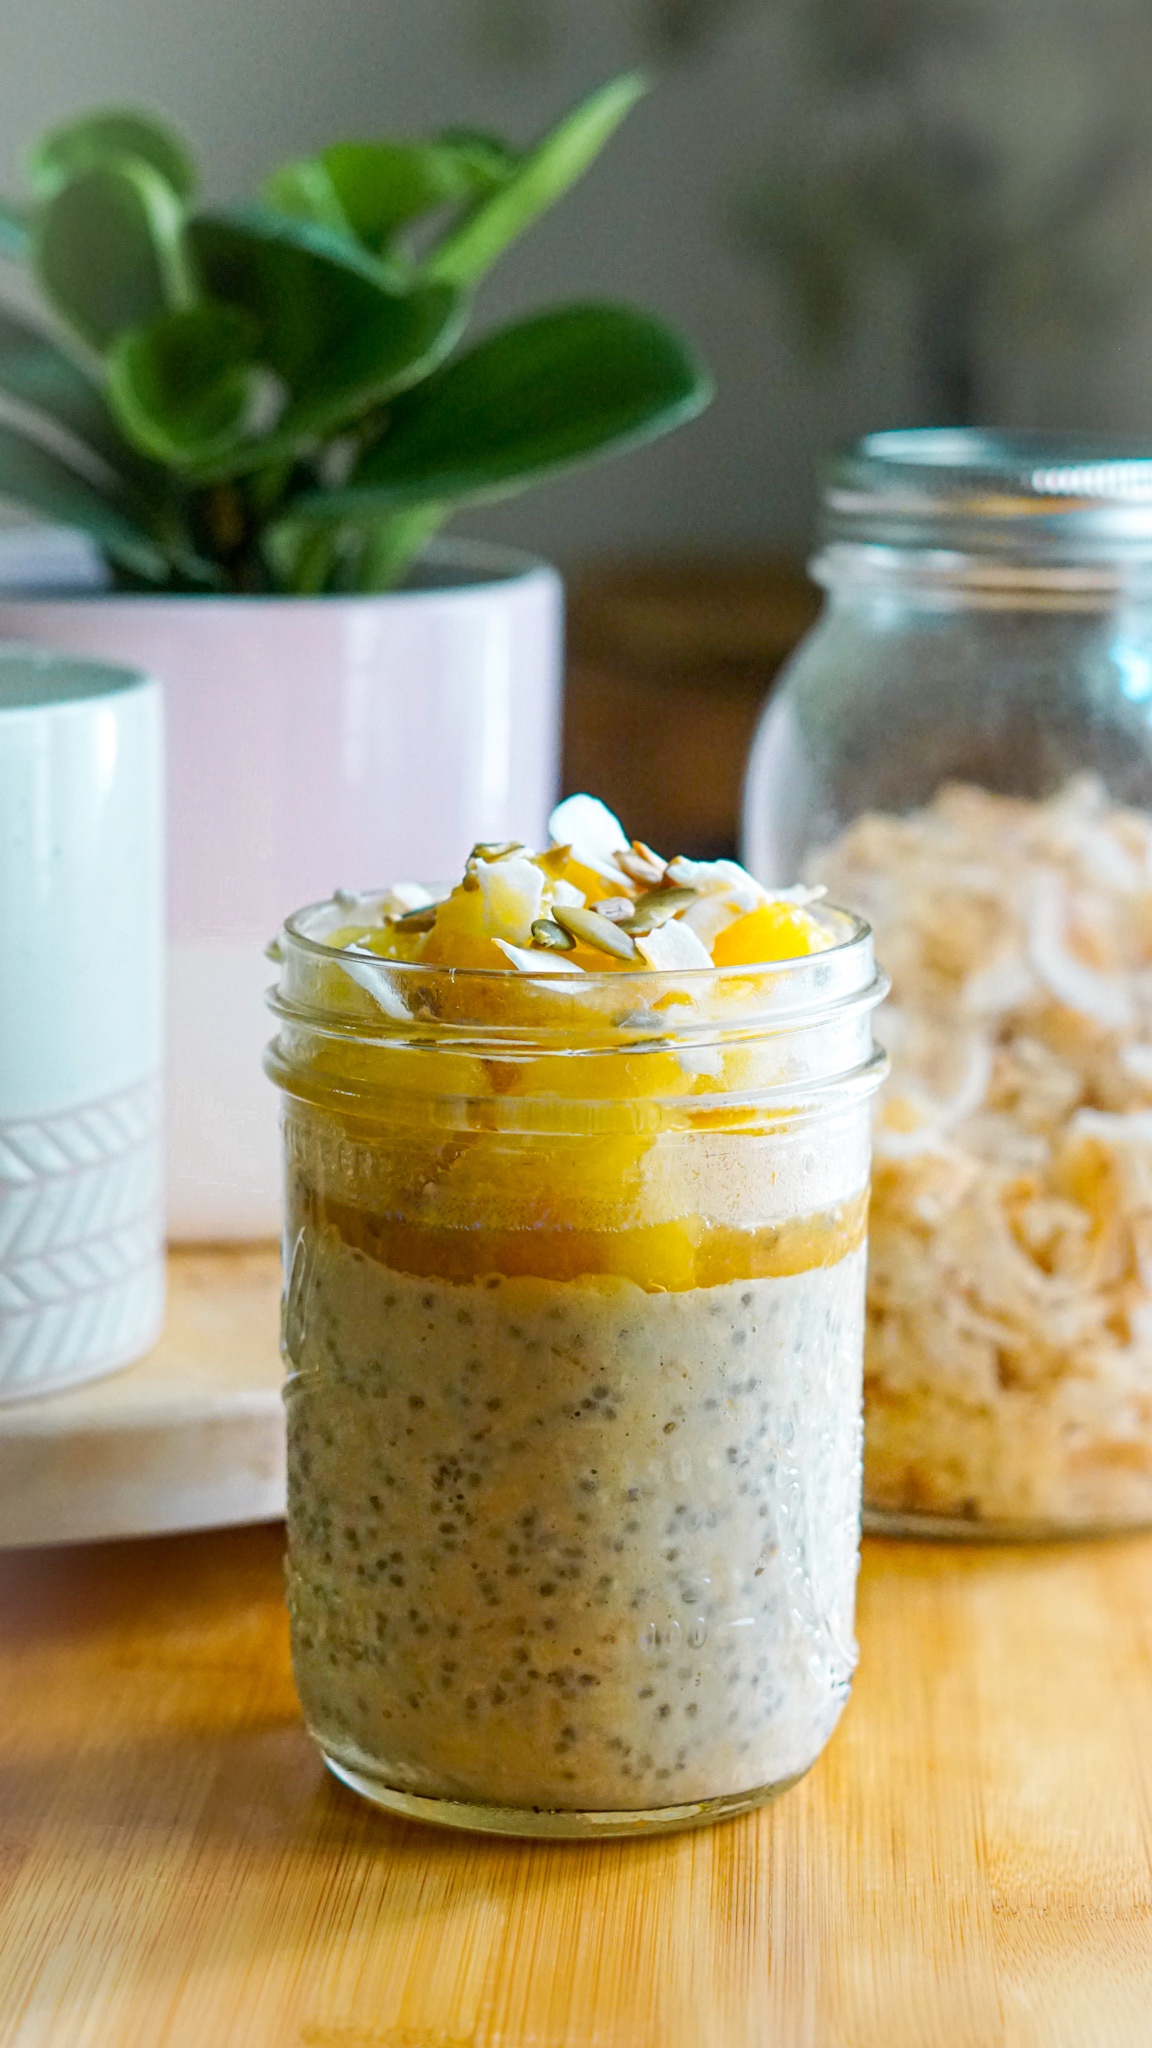 Overnight Oats Containers with Lids, Practical Muesli Container to